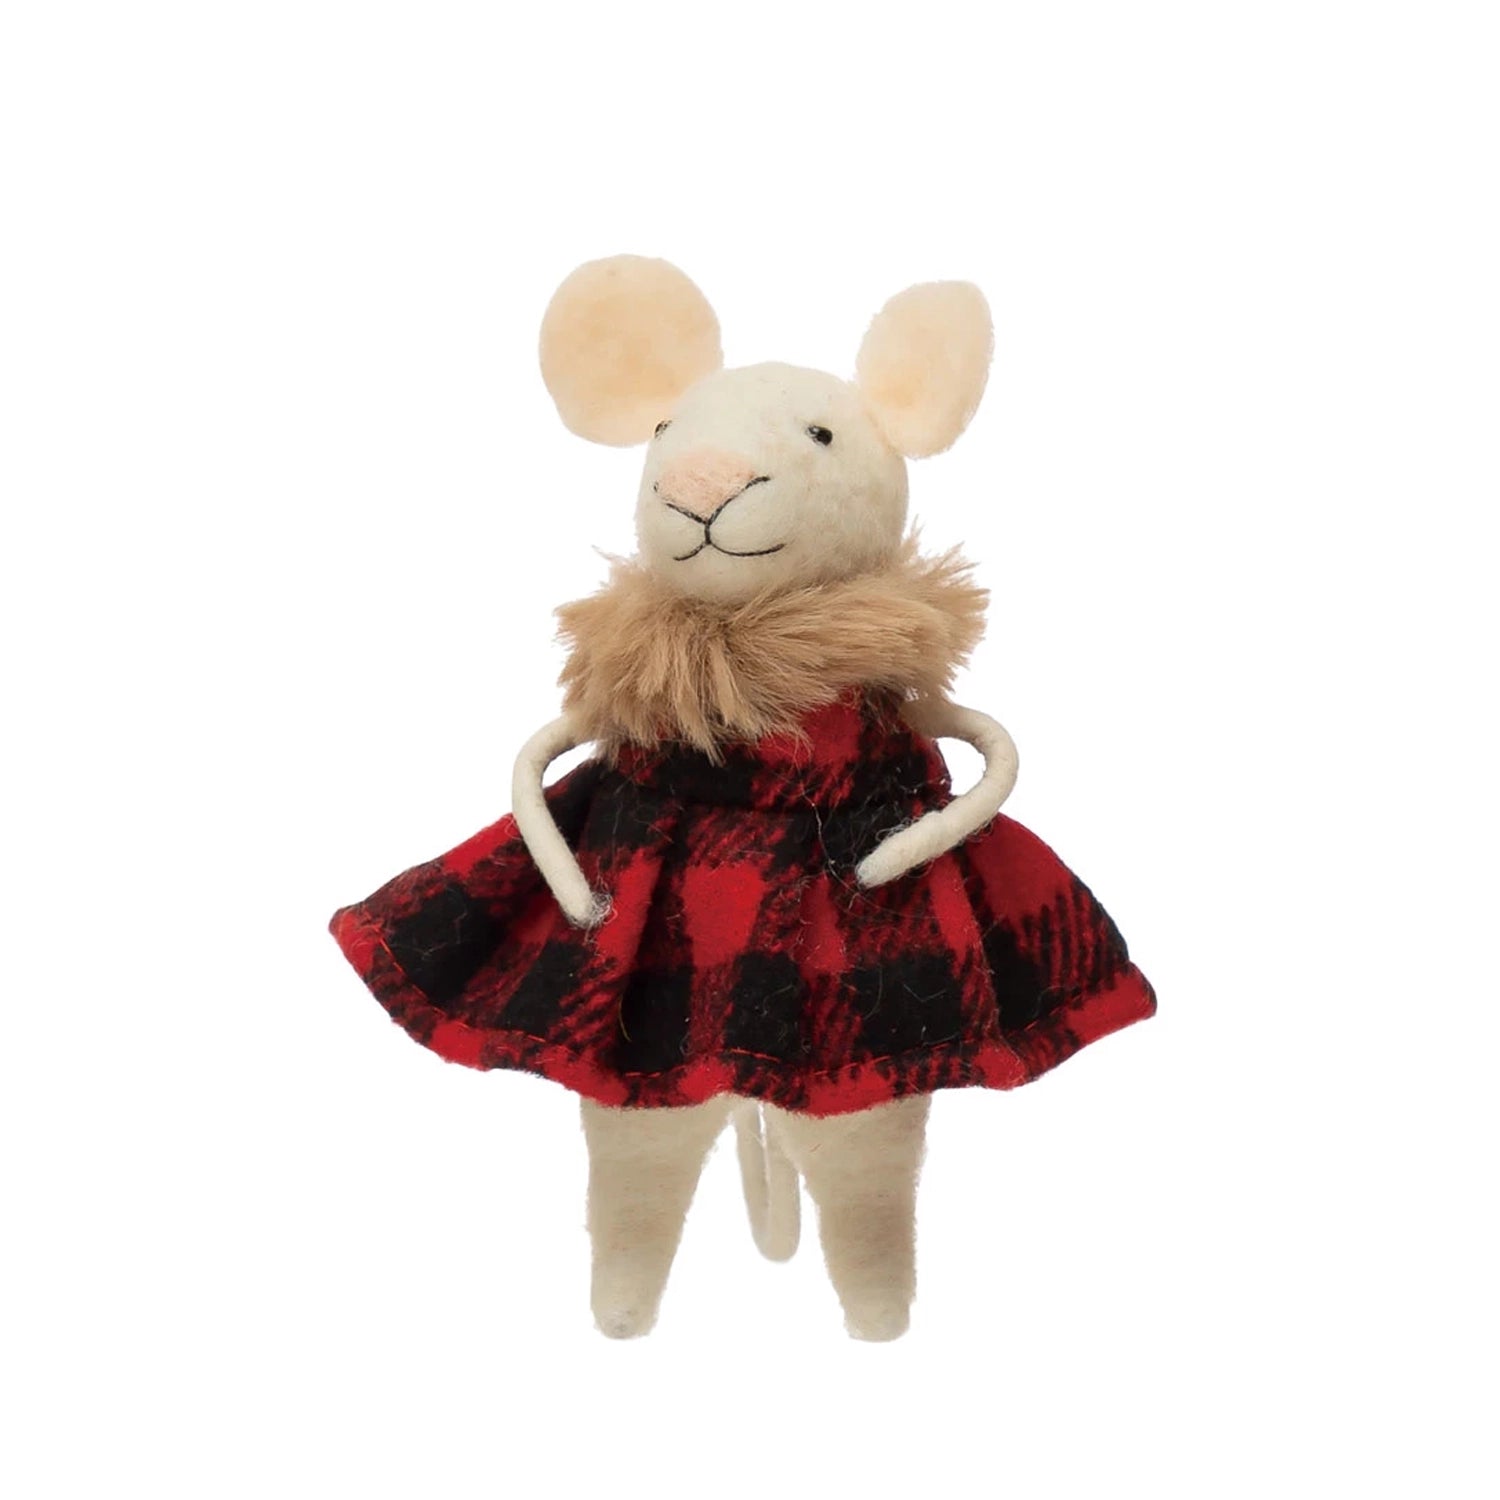 Wool Felt Mouse in Red Plaid Outfit , 2 Styles